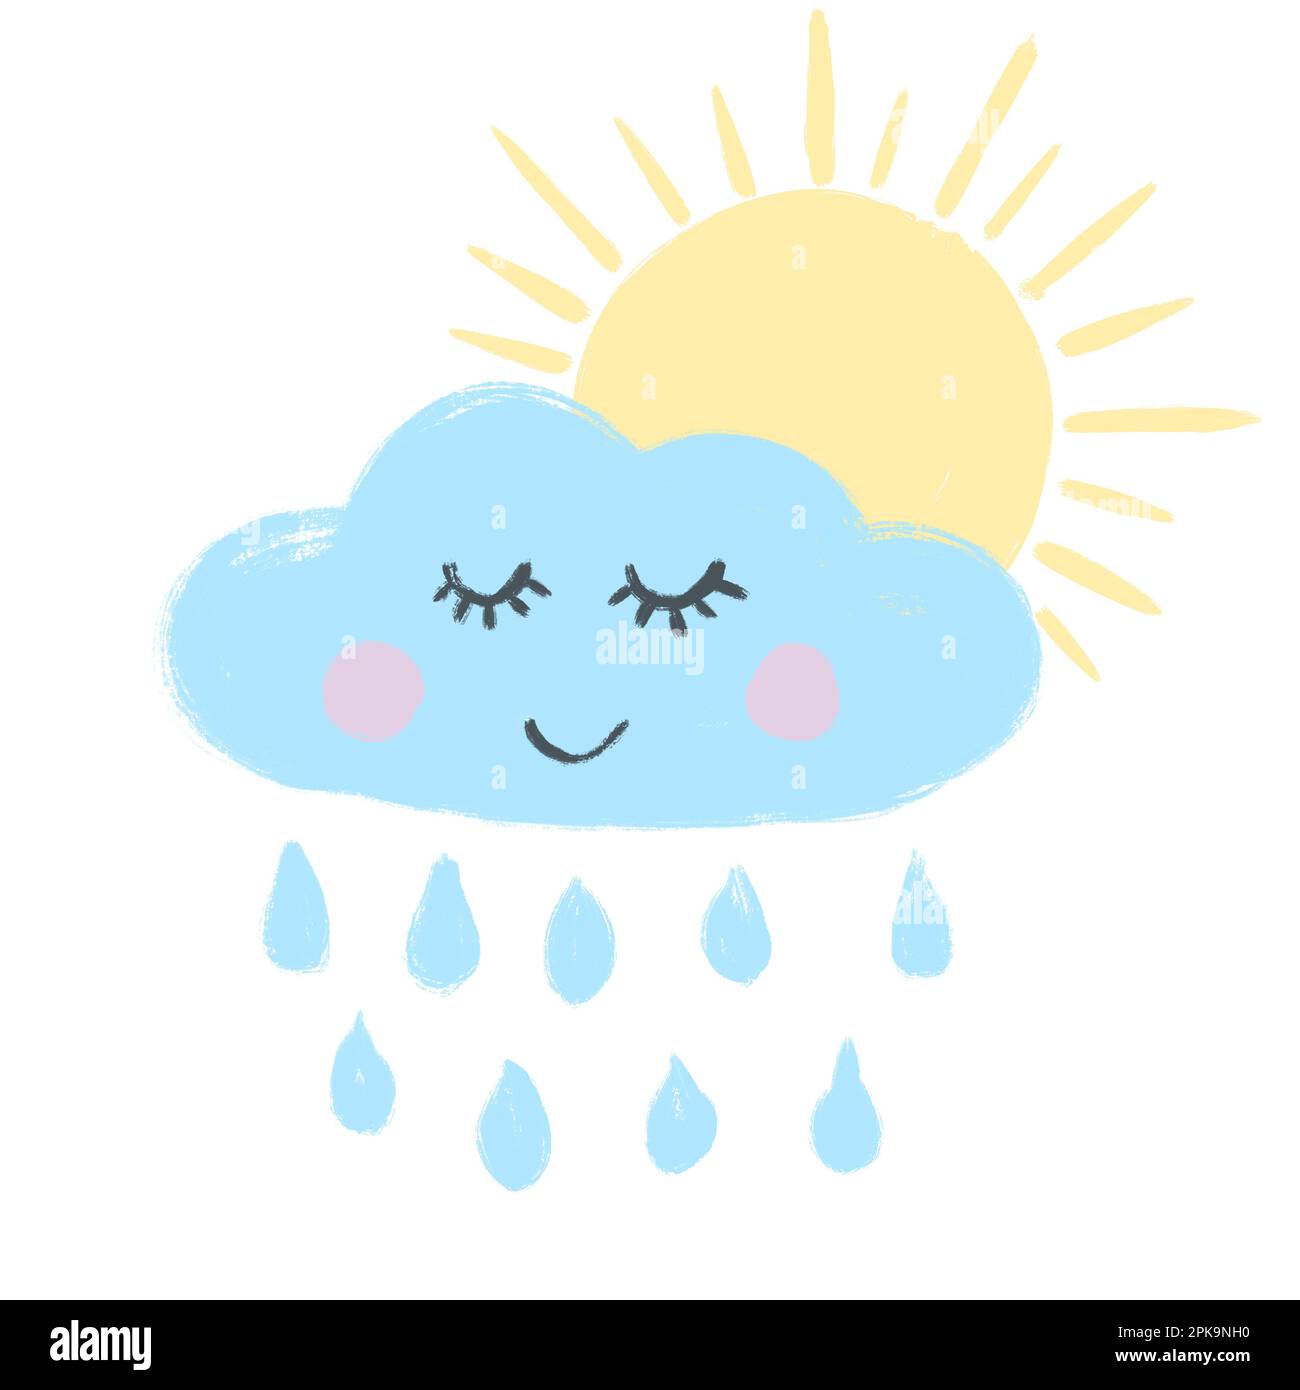 Hand drawn illustration of blue cute cloud with rain drops and yellow sun. Funny nursery design for kids children, simple minilamist character anture weather baby room poster decor Stock Photo